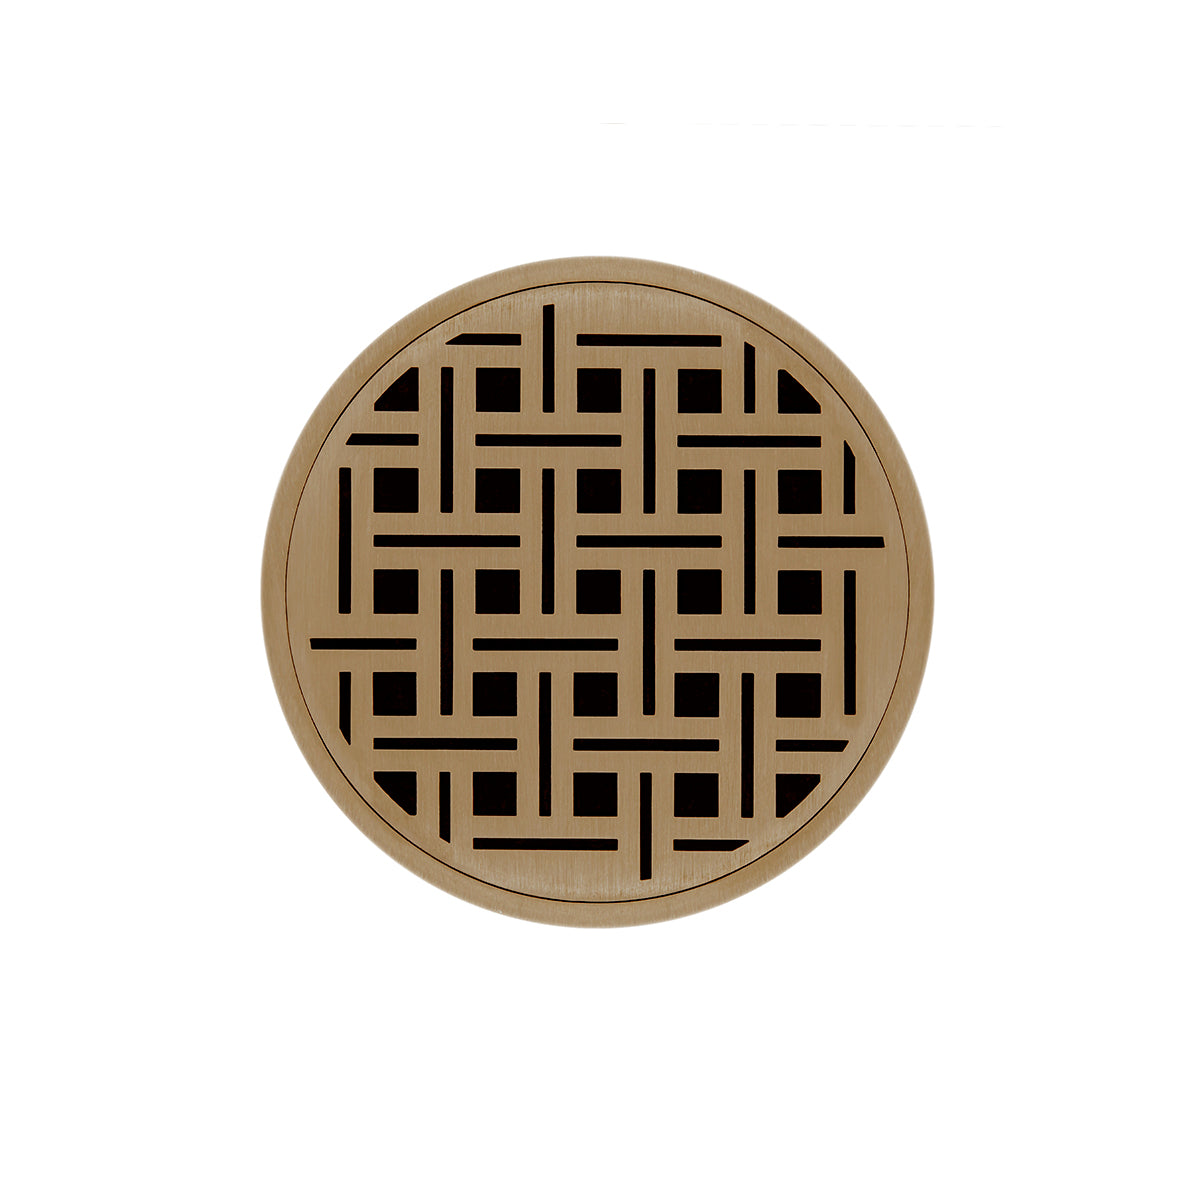 Infinity Drain 5" Round RVDB 5 Premium Center Drain Kit with Weave Pattern Decorative Plate with PVC Bonded Flange Drain Body, 2", 3" and 4" Outlet